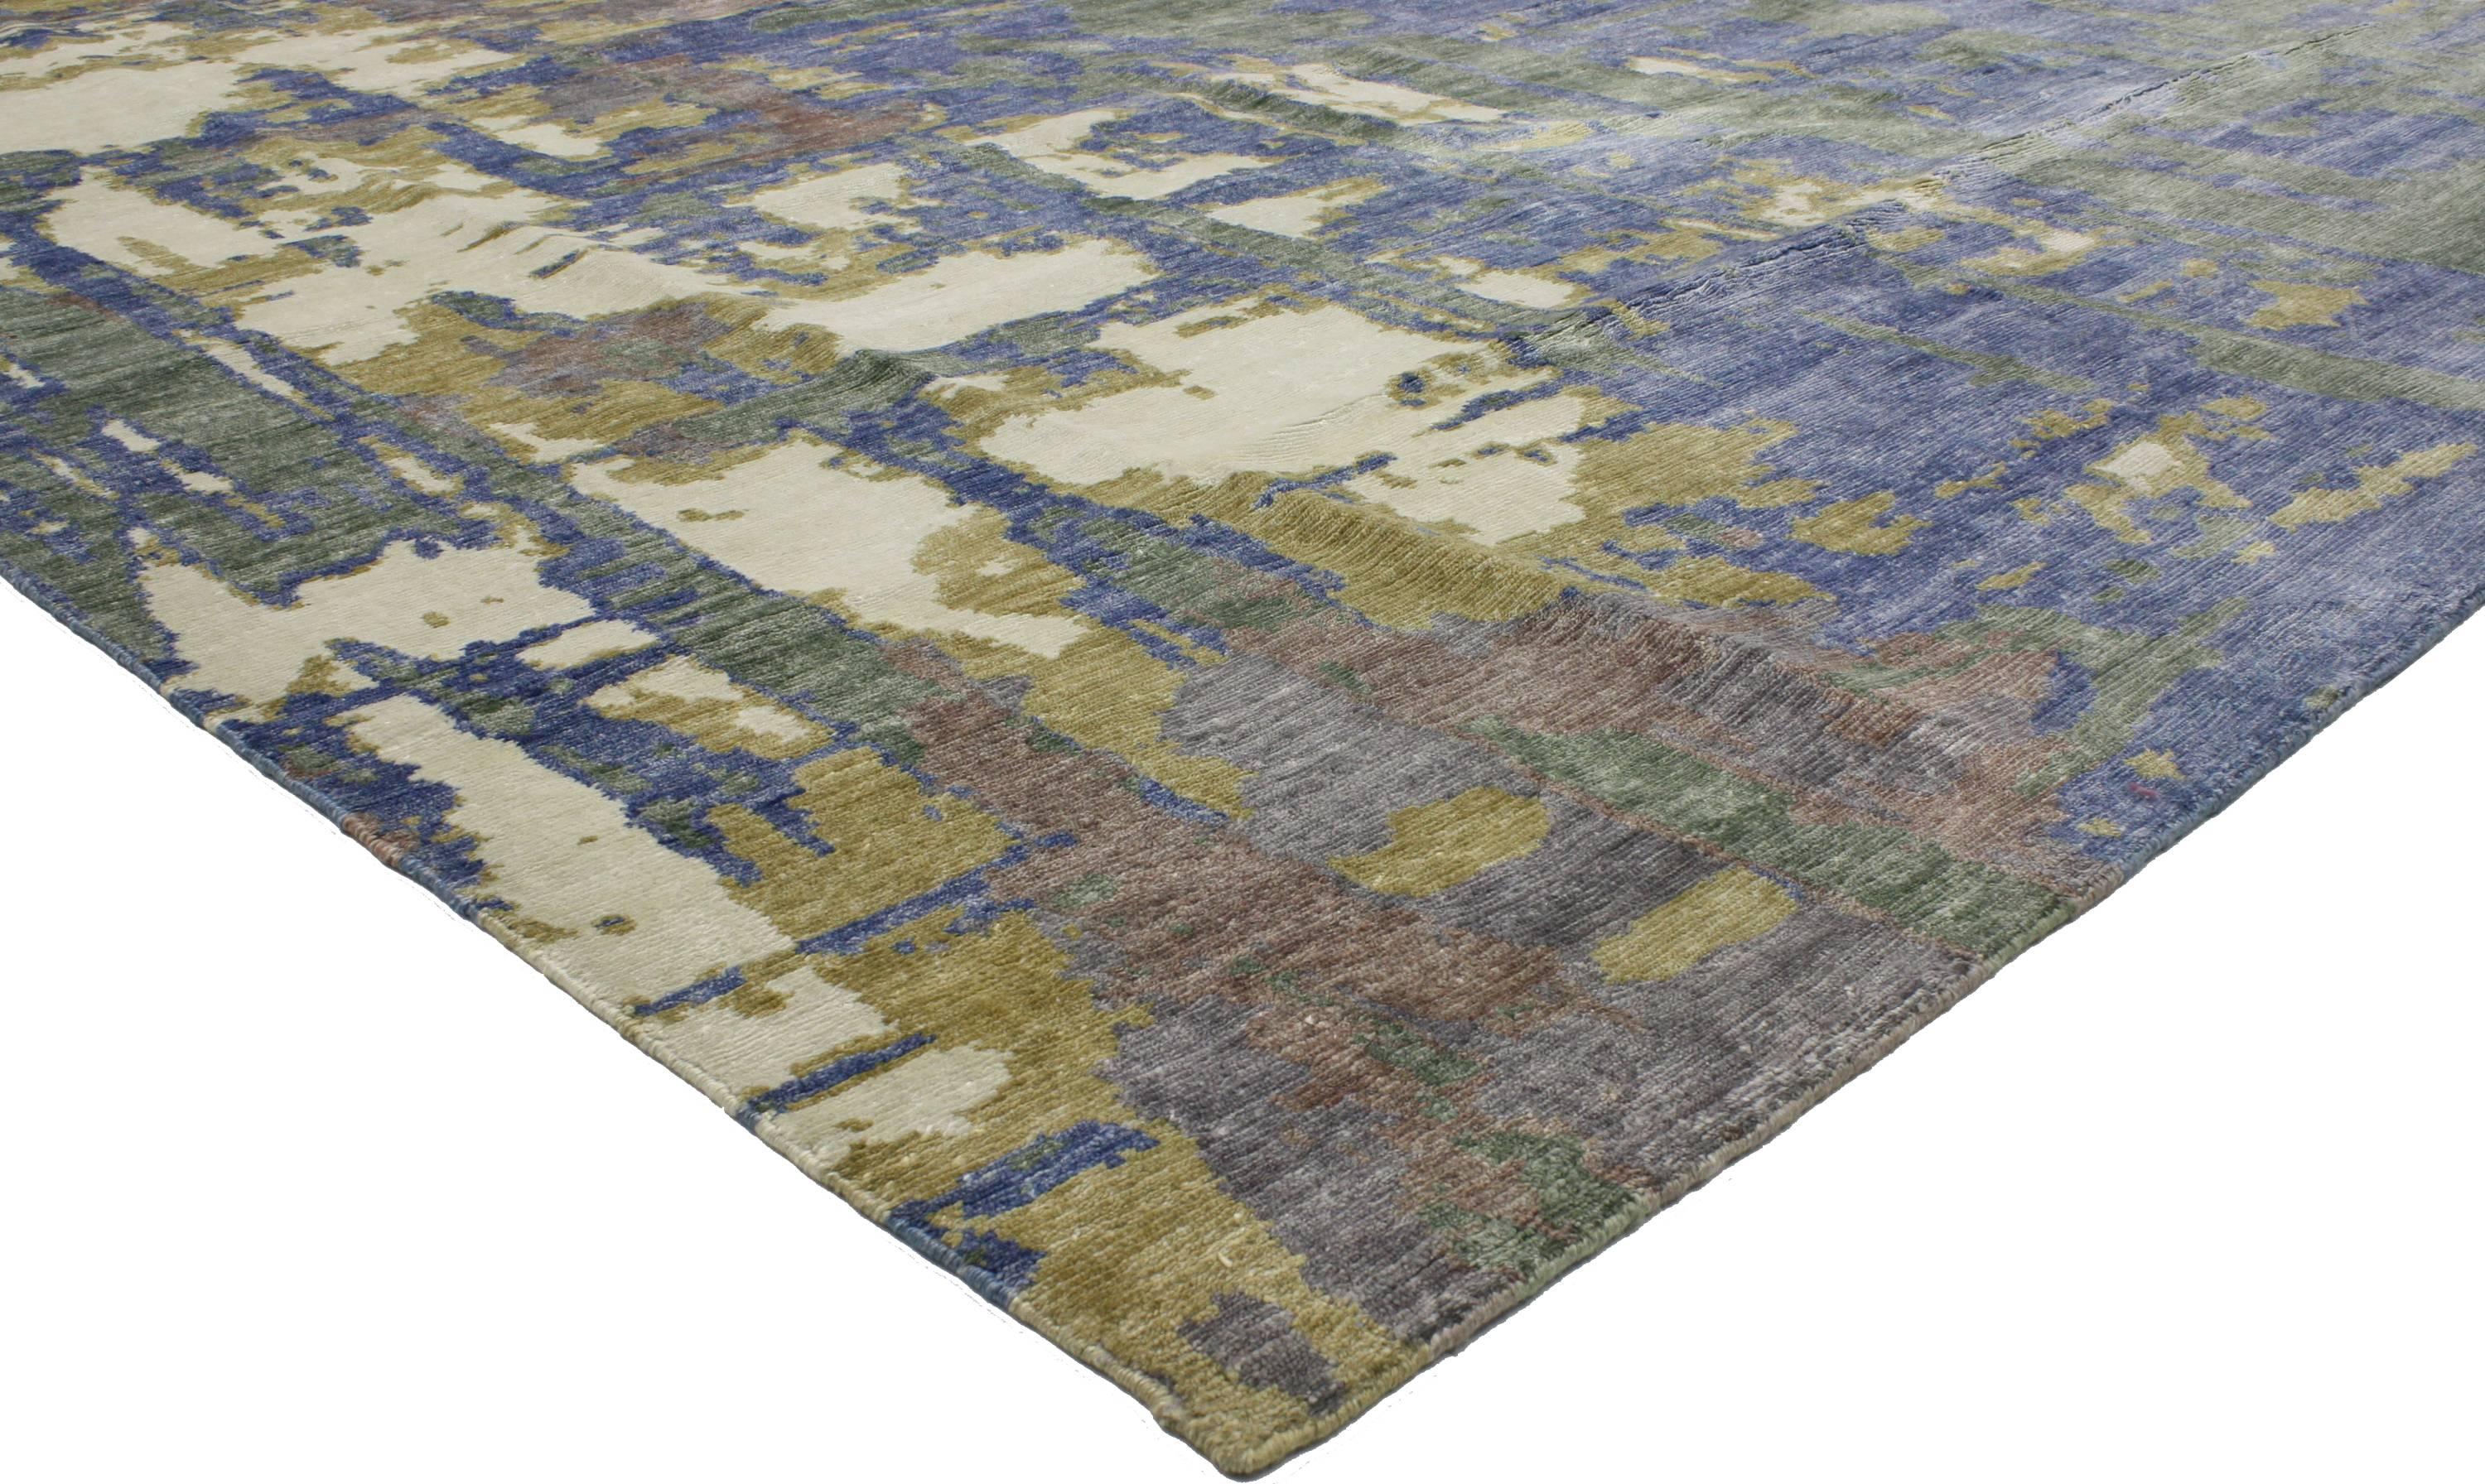 30159 New Contemporary Silk Rug with Abstract Expressionist Grunge Art Style 07'10 X 09'10. This hand knotted silk contemporary abstract rug with abstract expressionist Grunge Art style is the epitome of relaxed luxury. Reflecting elements of rough